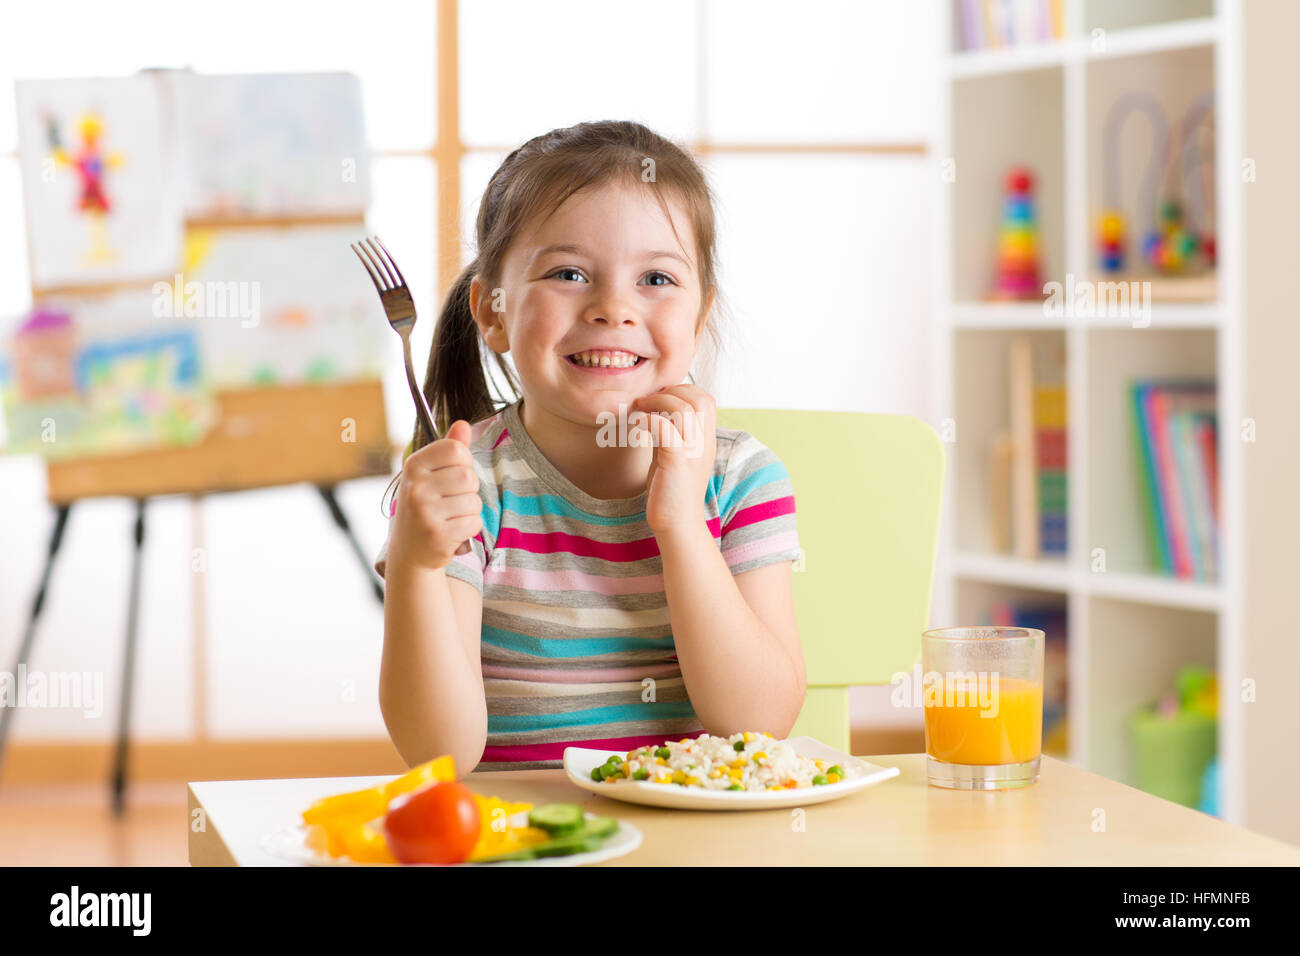 child little girl with fork ready to eat healthy food Stock Photo